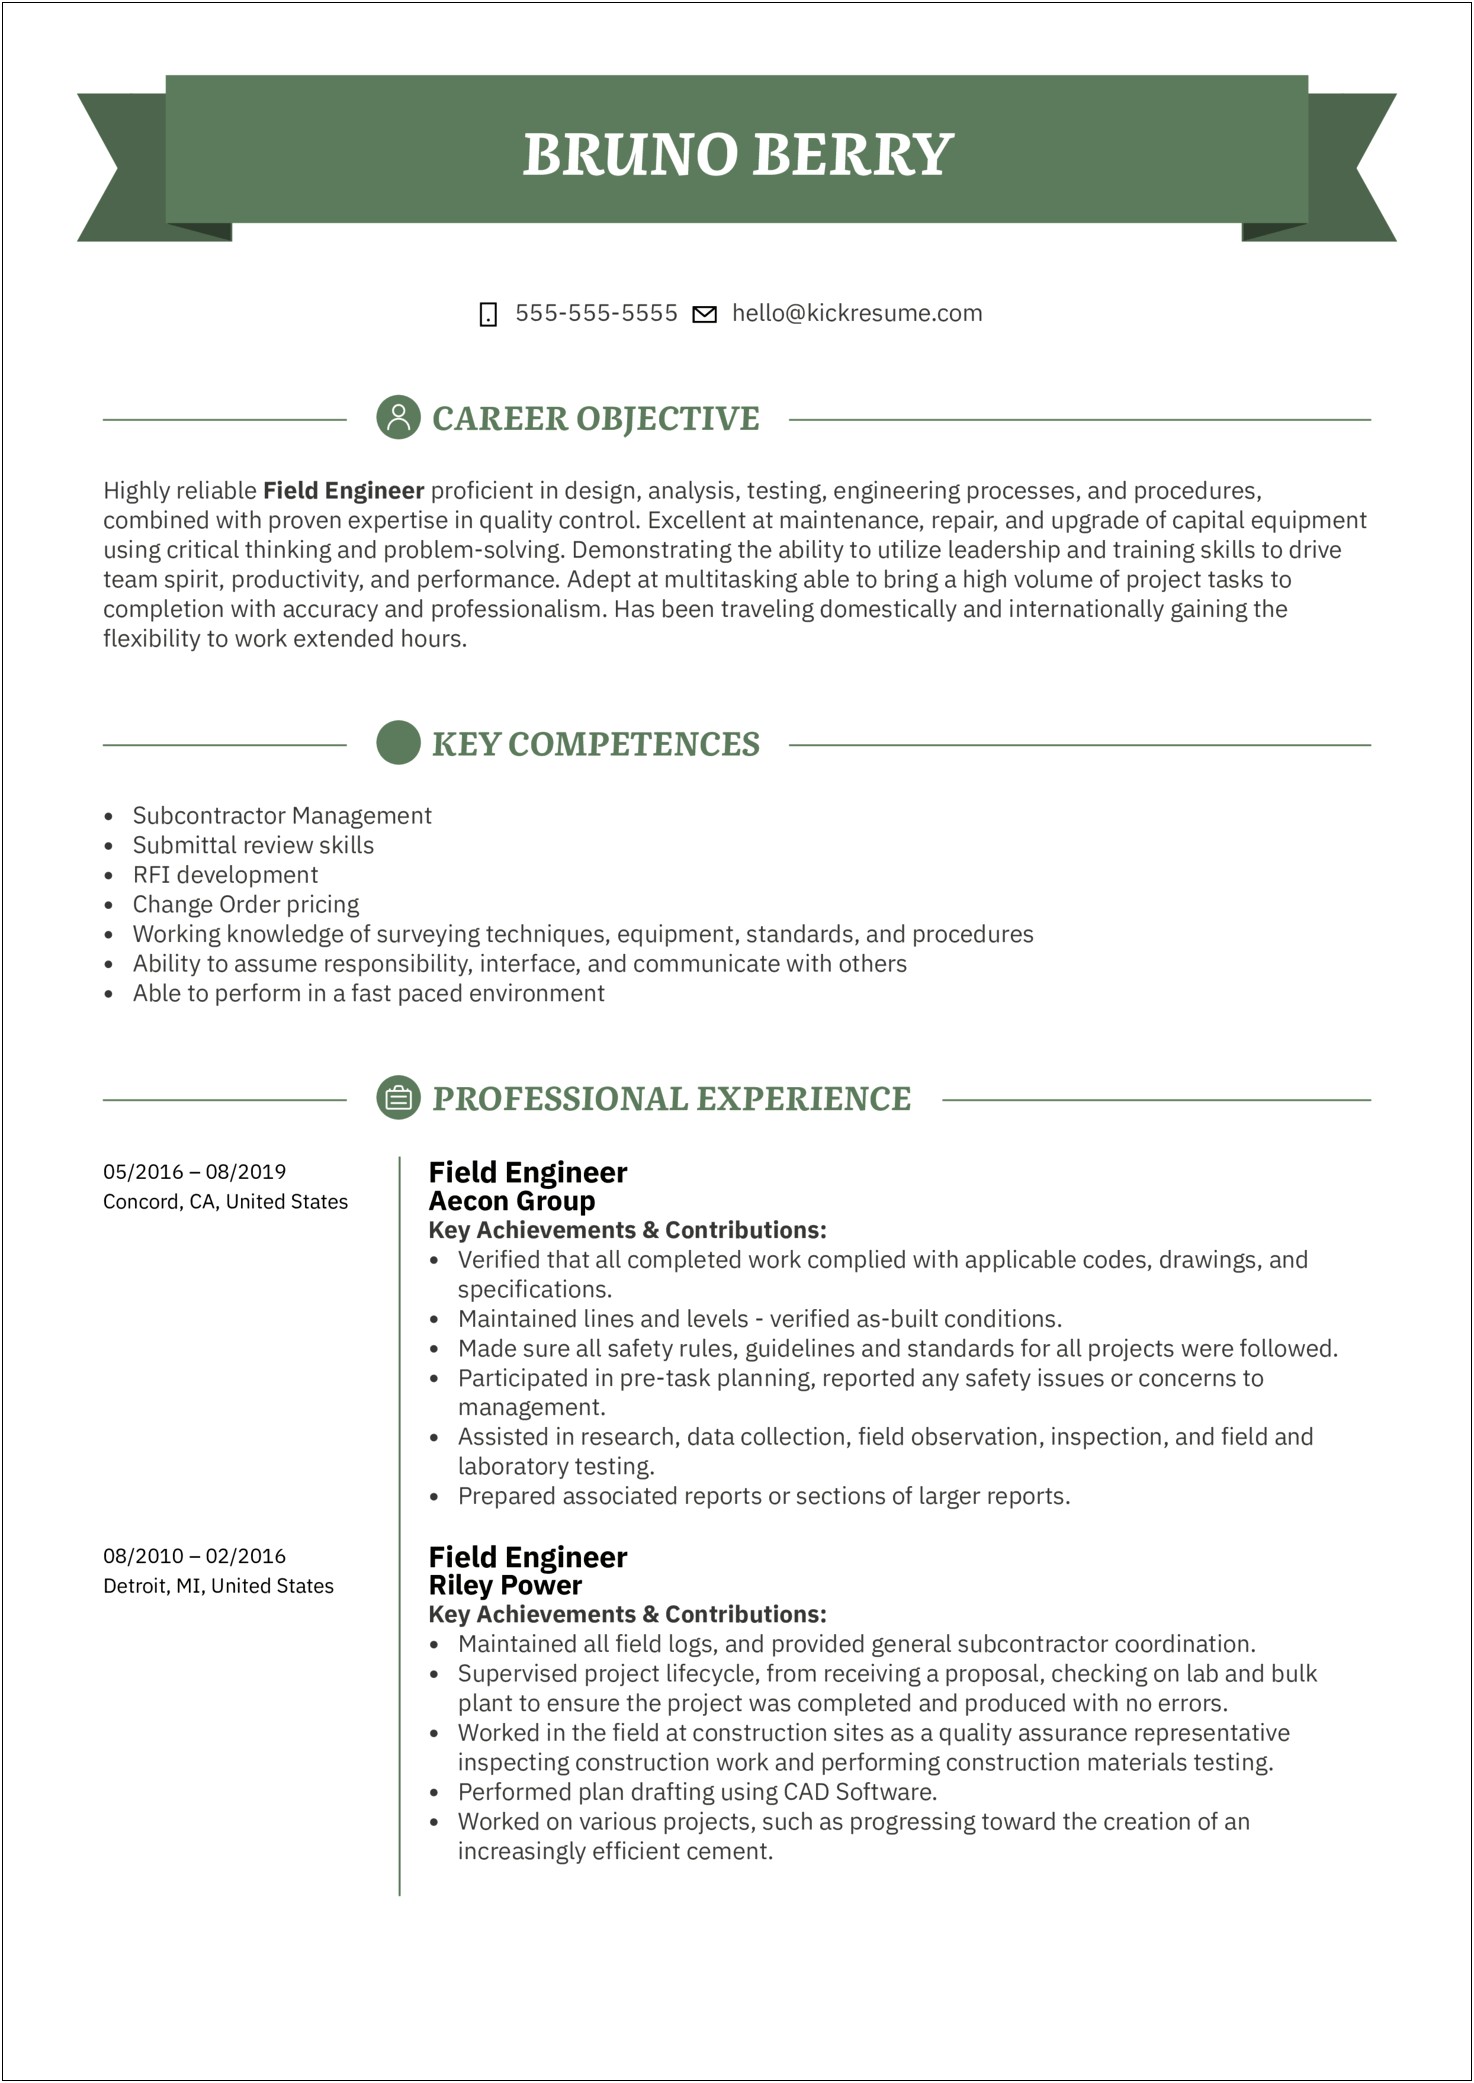 Job Related Personal Achievements Resume Examples